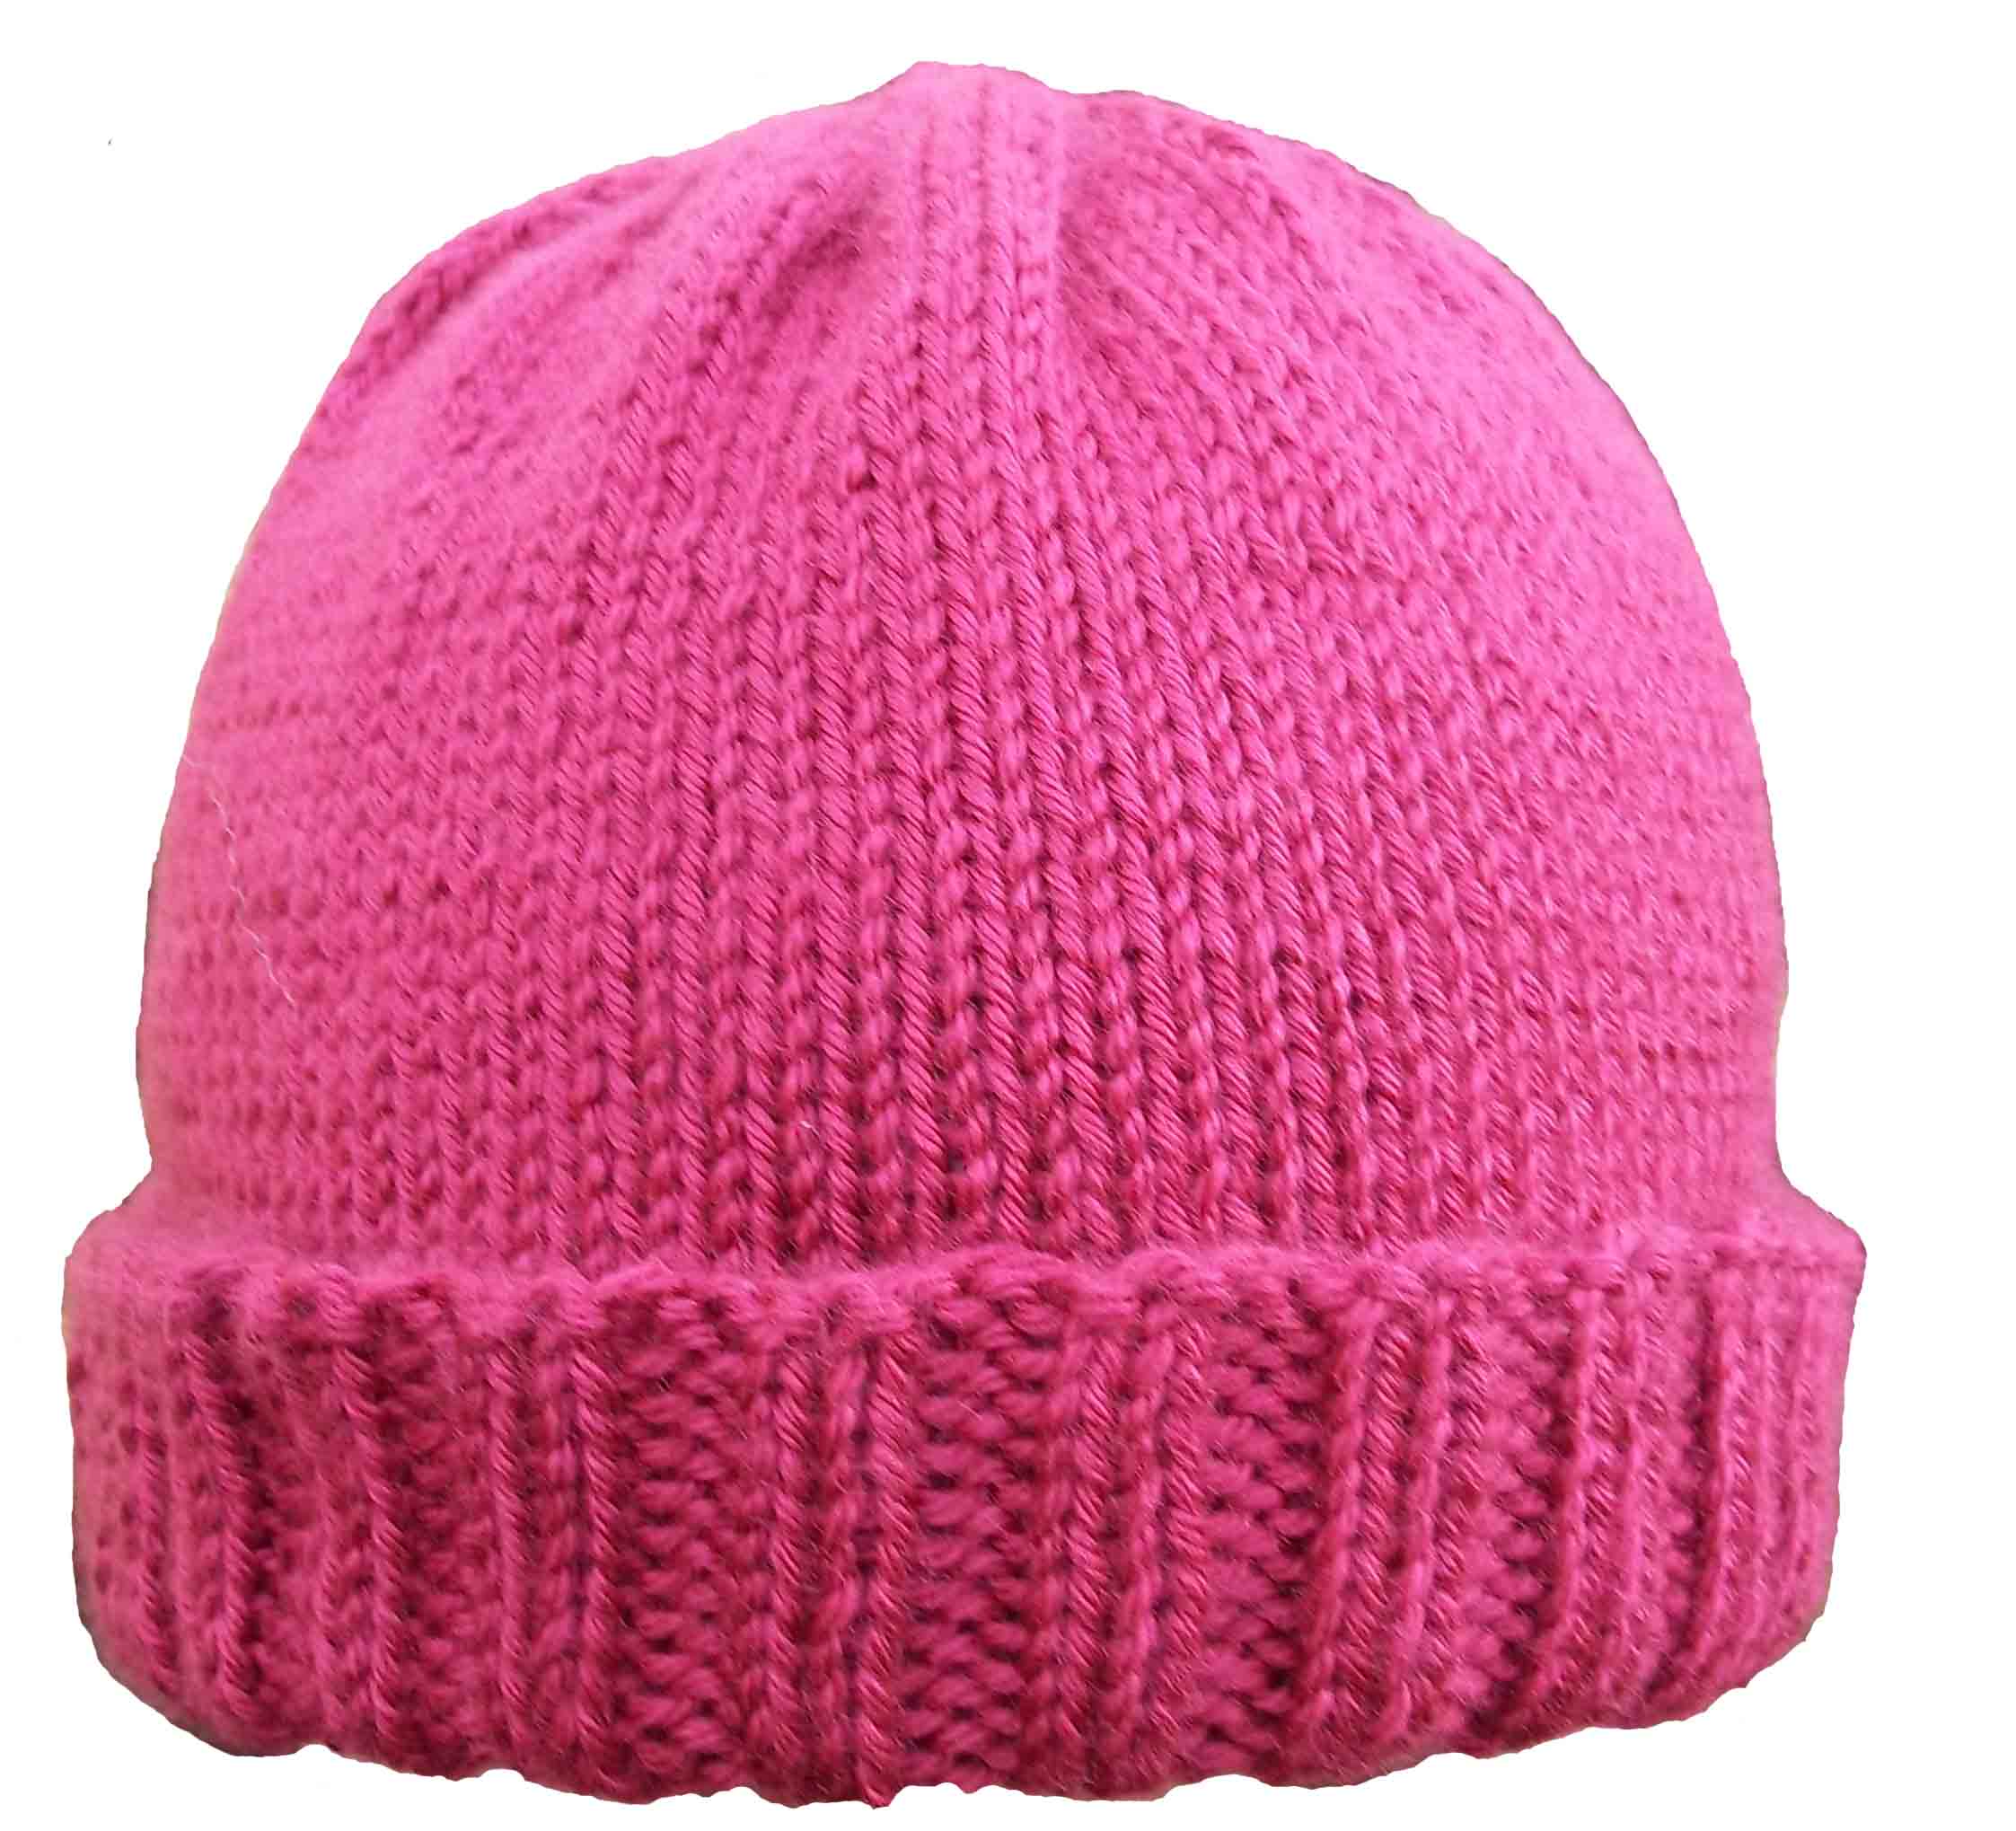 easy-knitting-patterns-hats-catalog-of-patterns